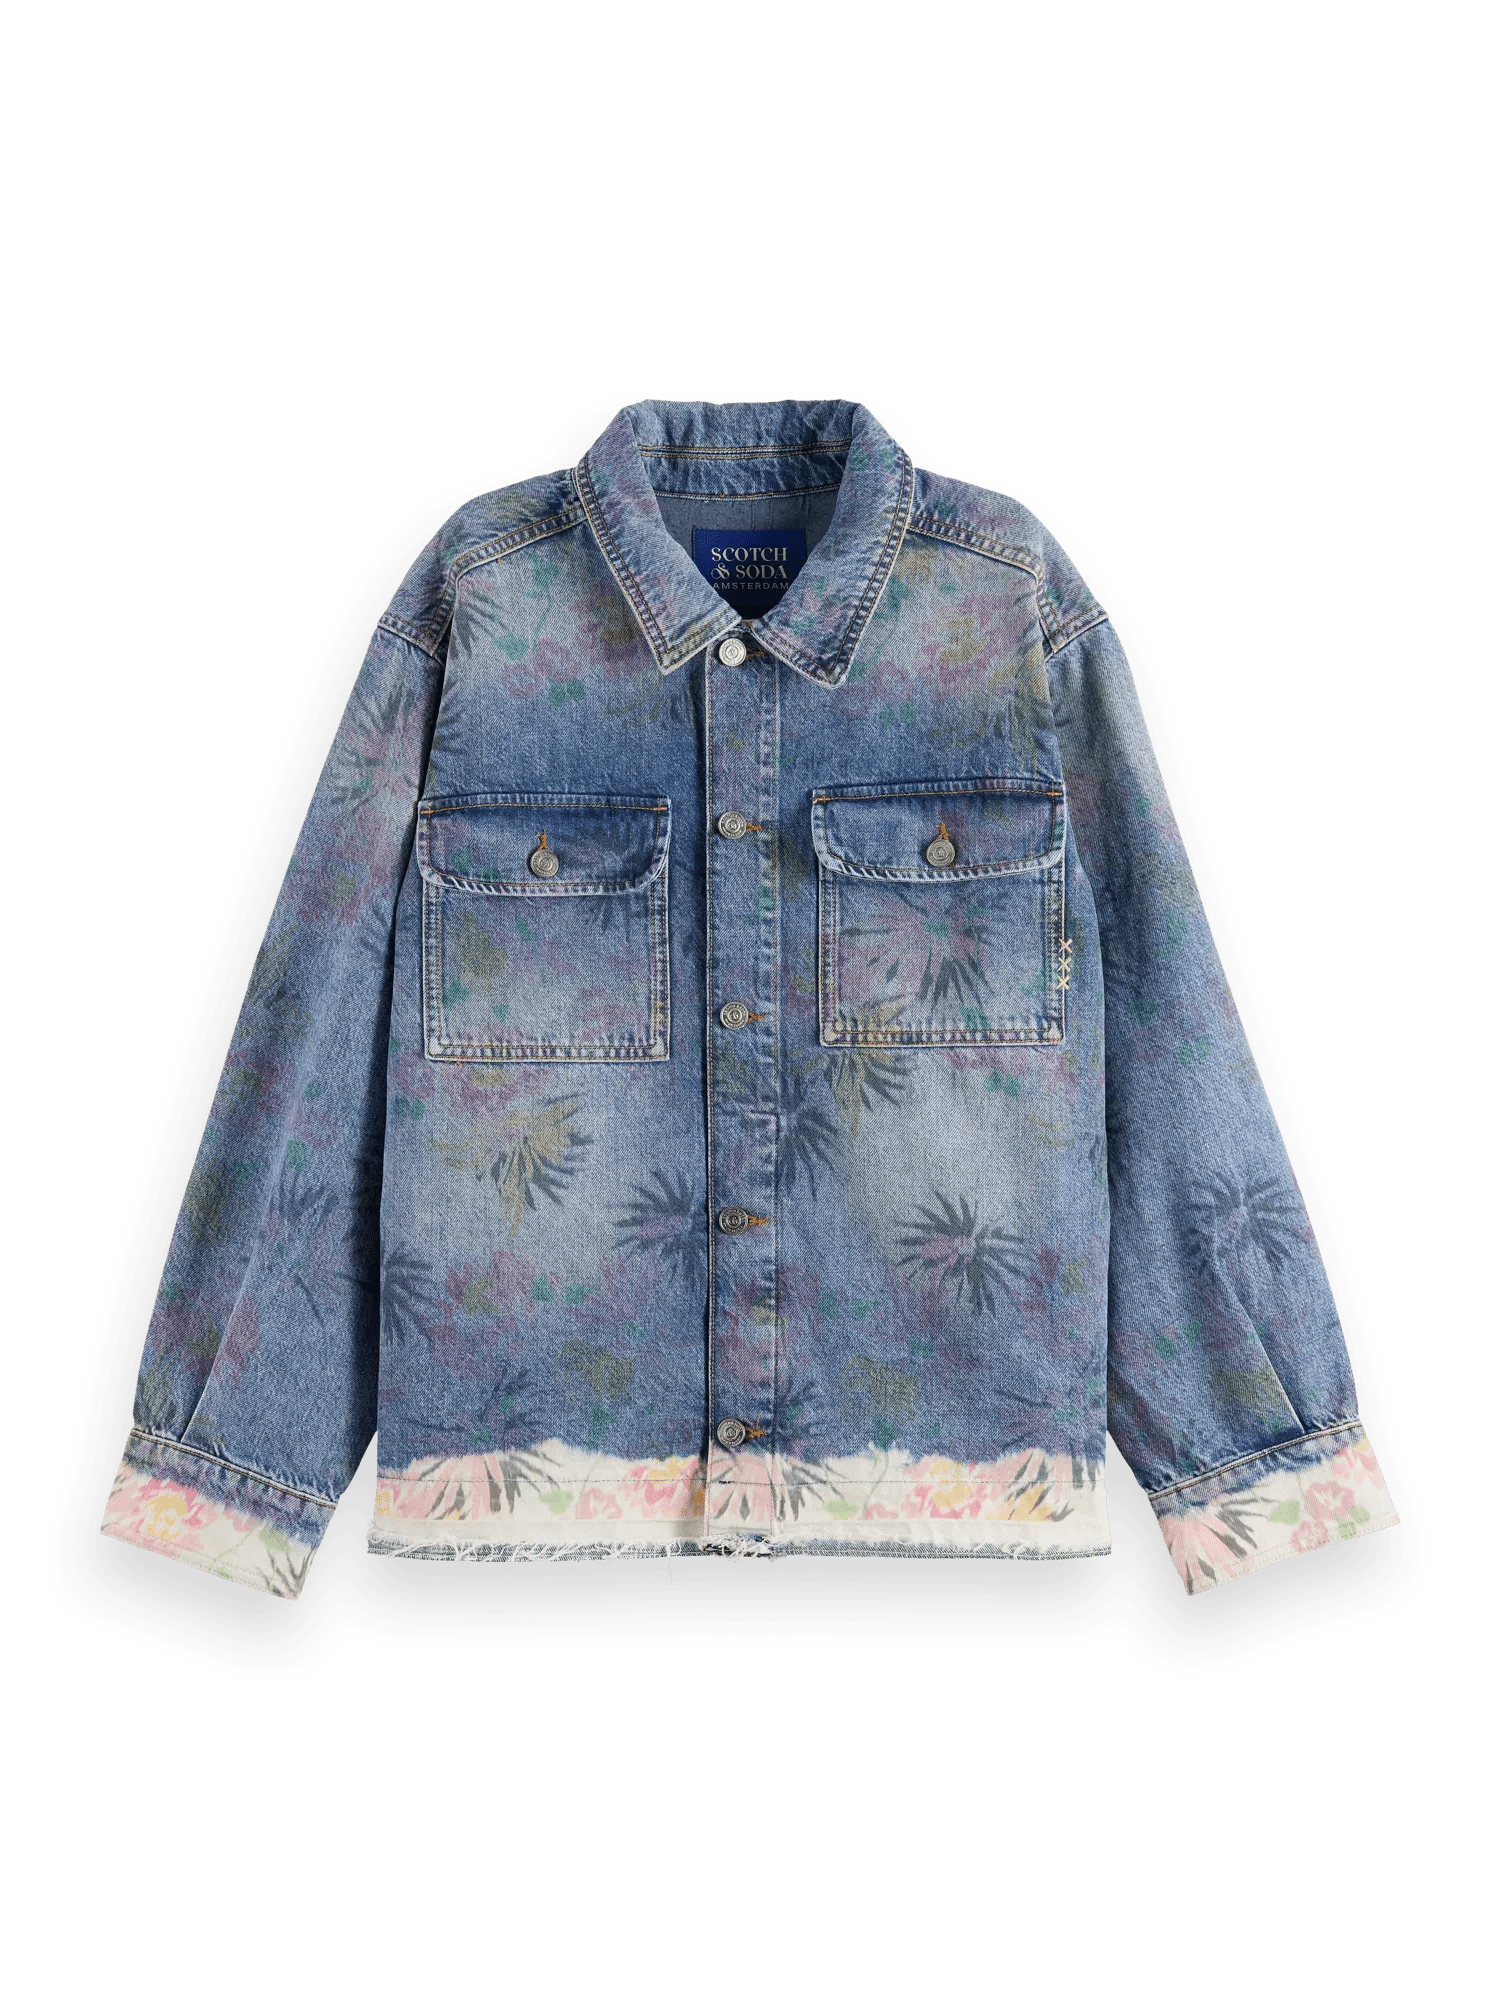 Scotch & Soda Trucker jacket with tie dye artworks - Peace and Love FNT